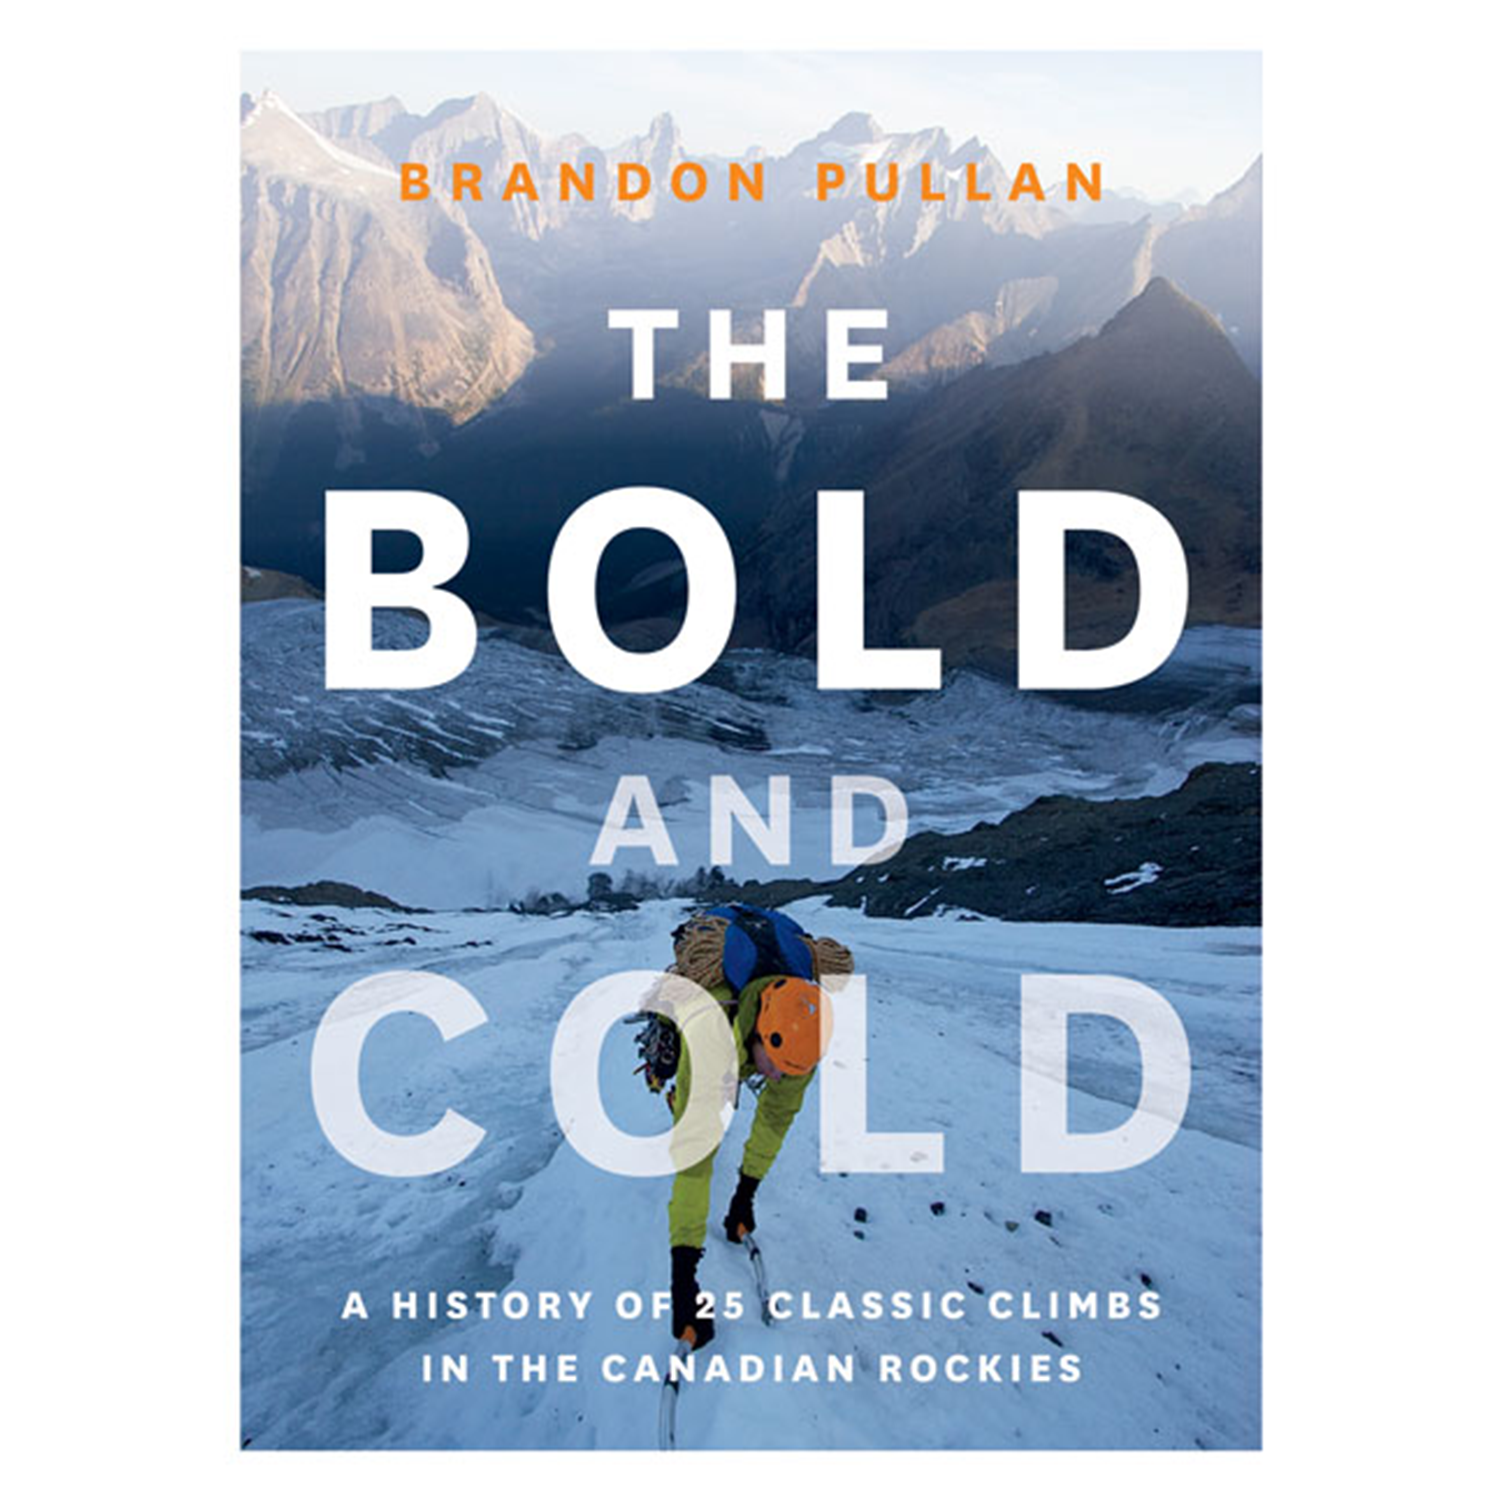 The Bold and Cold : A History of 25 Classic Climbs in the Canadian Rockies